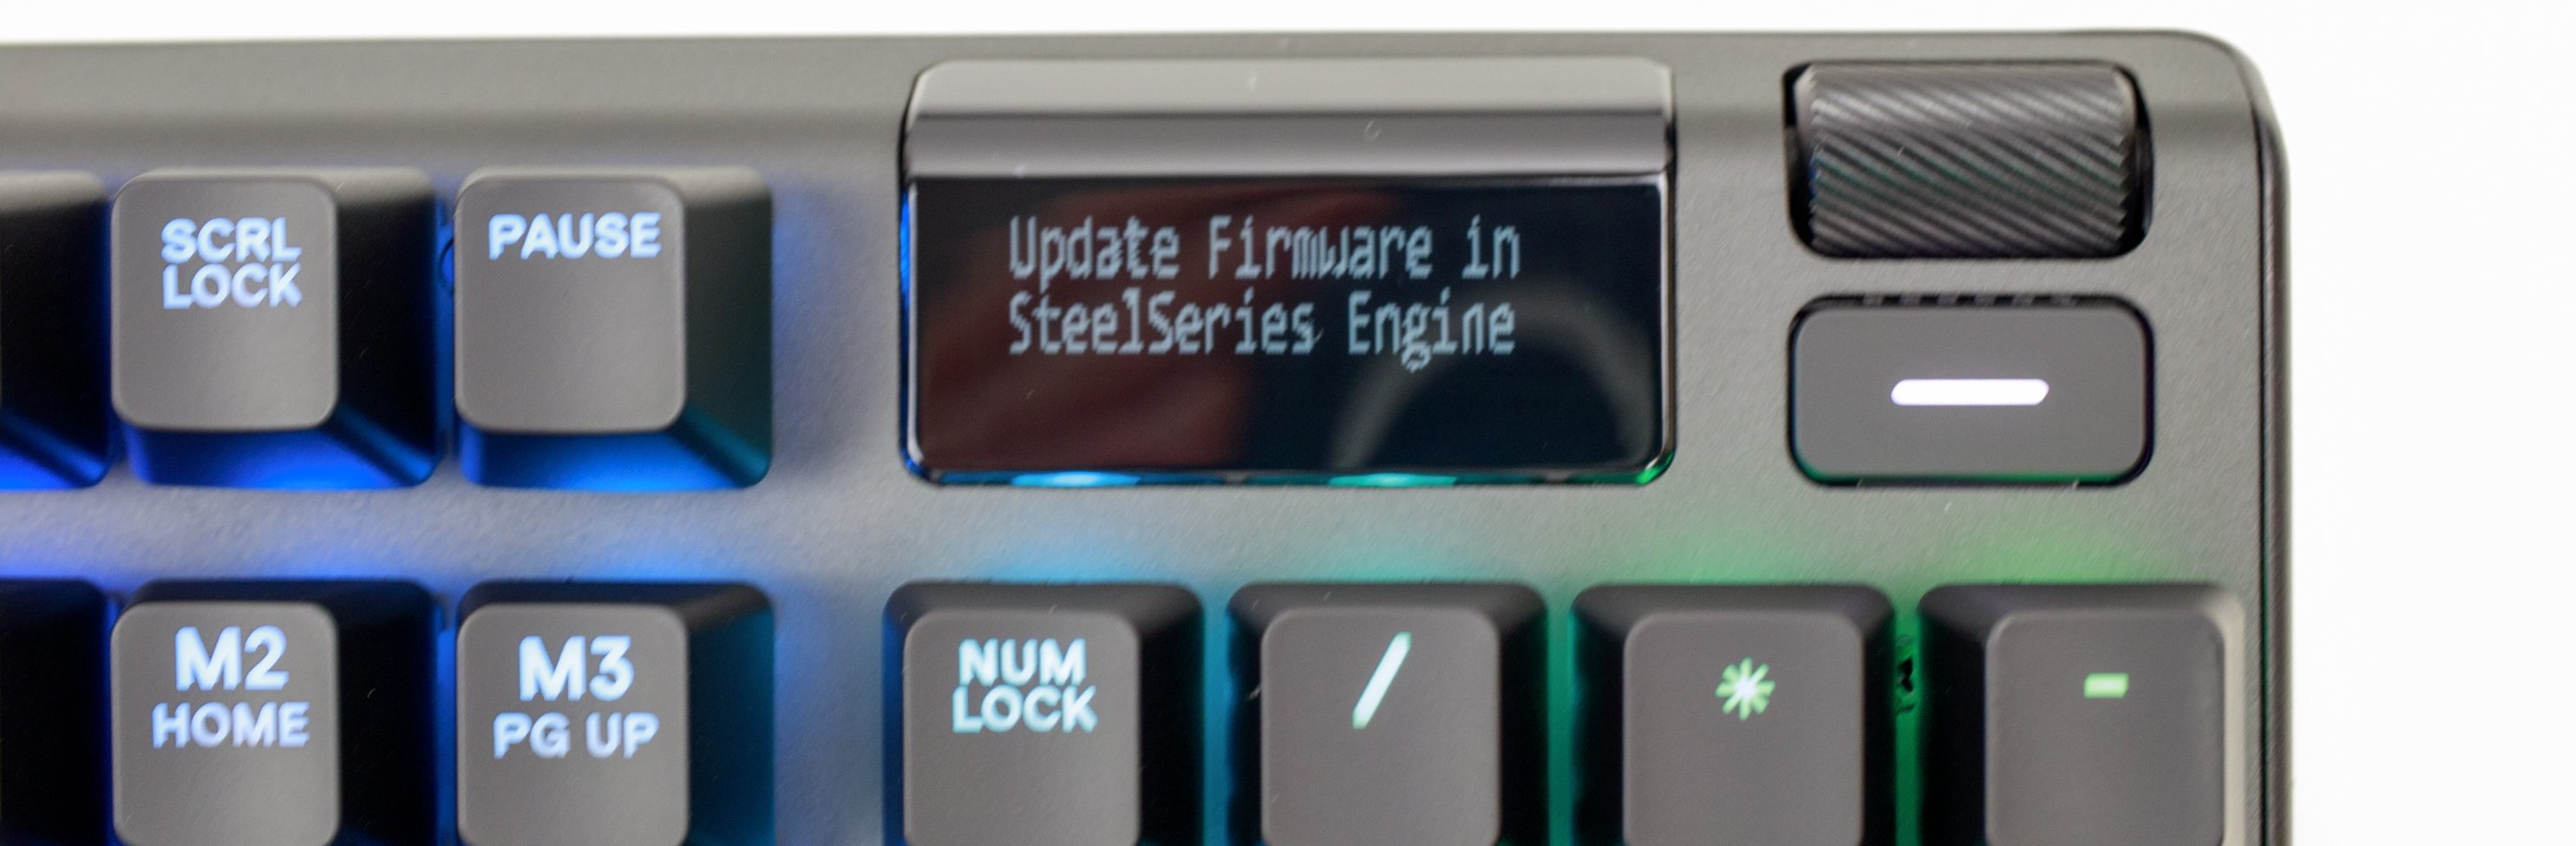 Steelseries Apex Pro The Keyboard With Adjustable Trigger Point Under Test